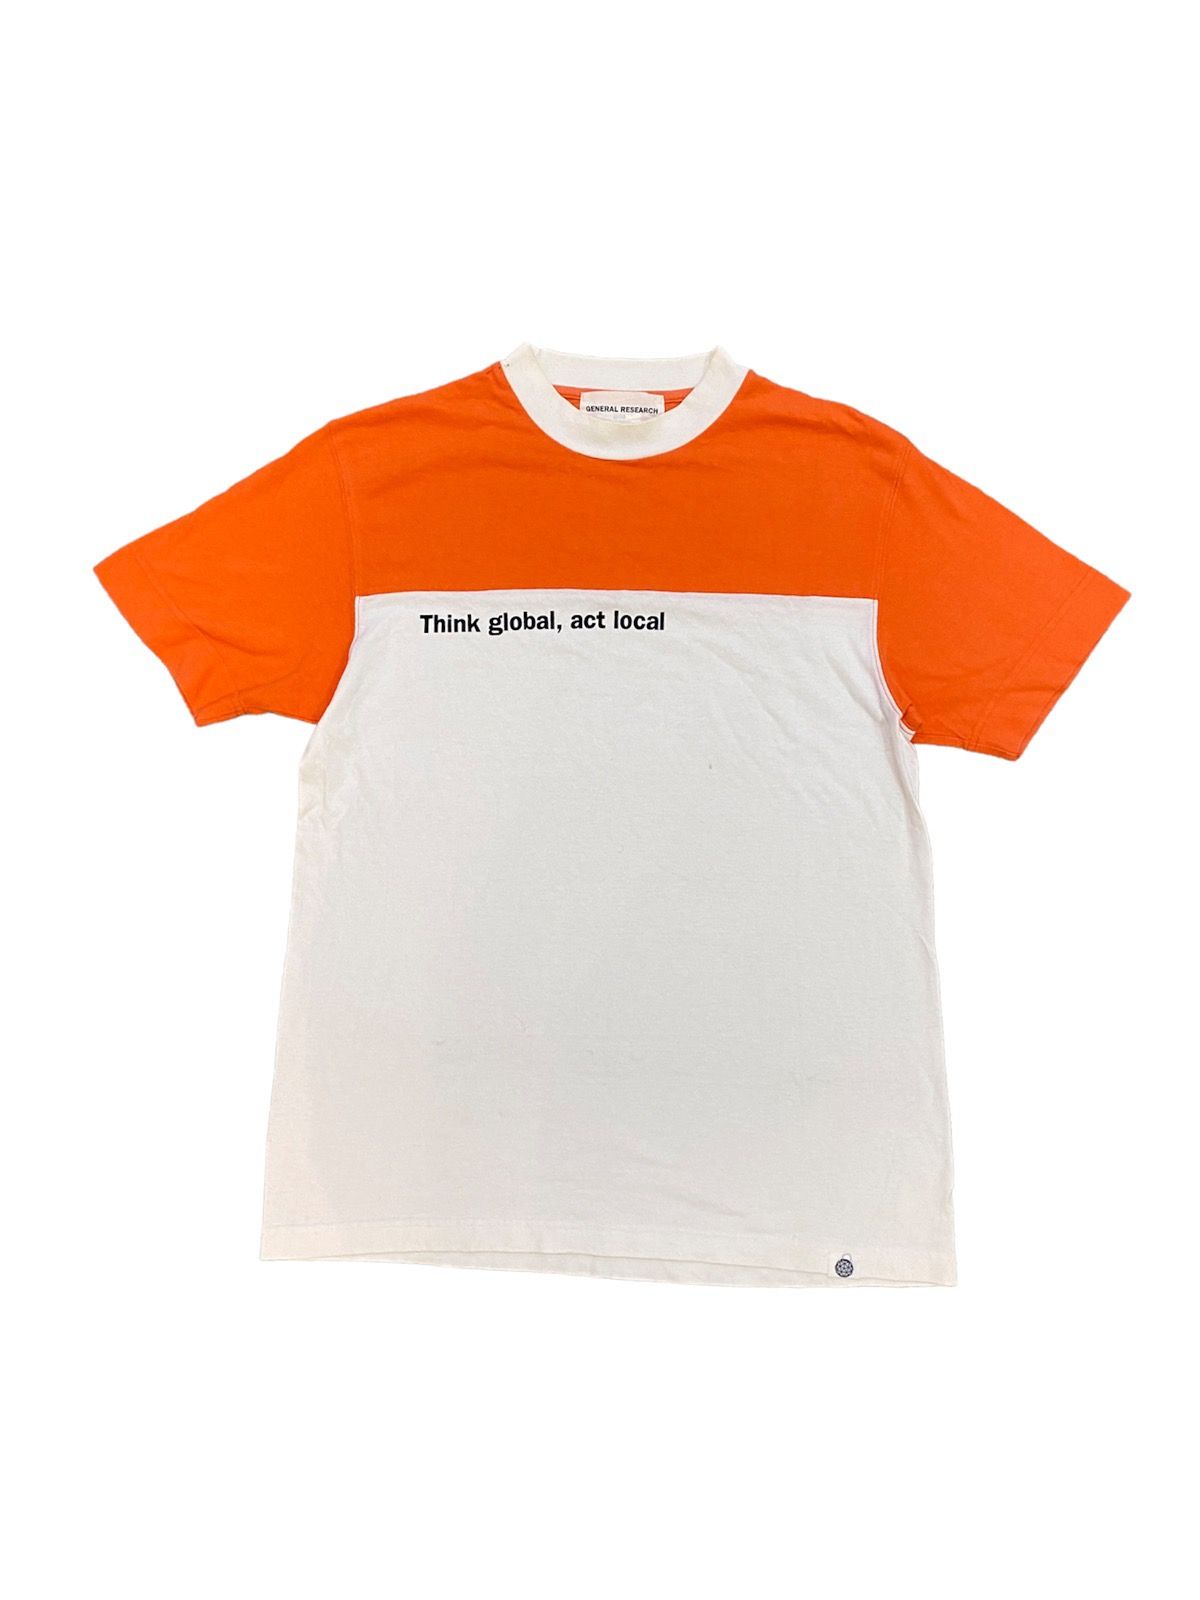 SS00 "Think Global, Act Local" Tee - 1